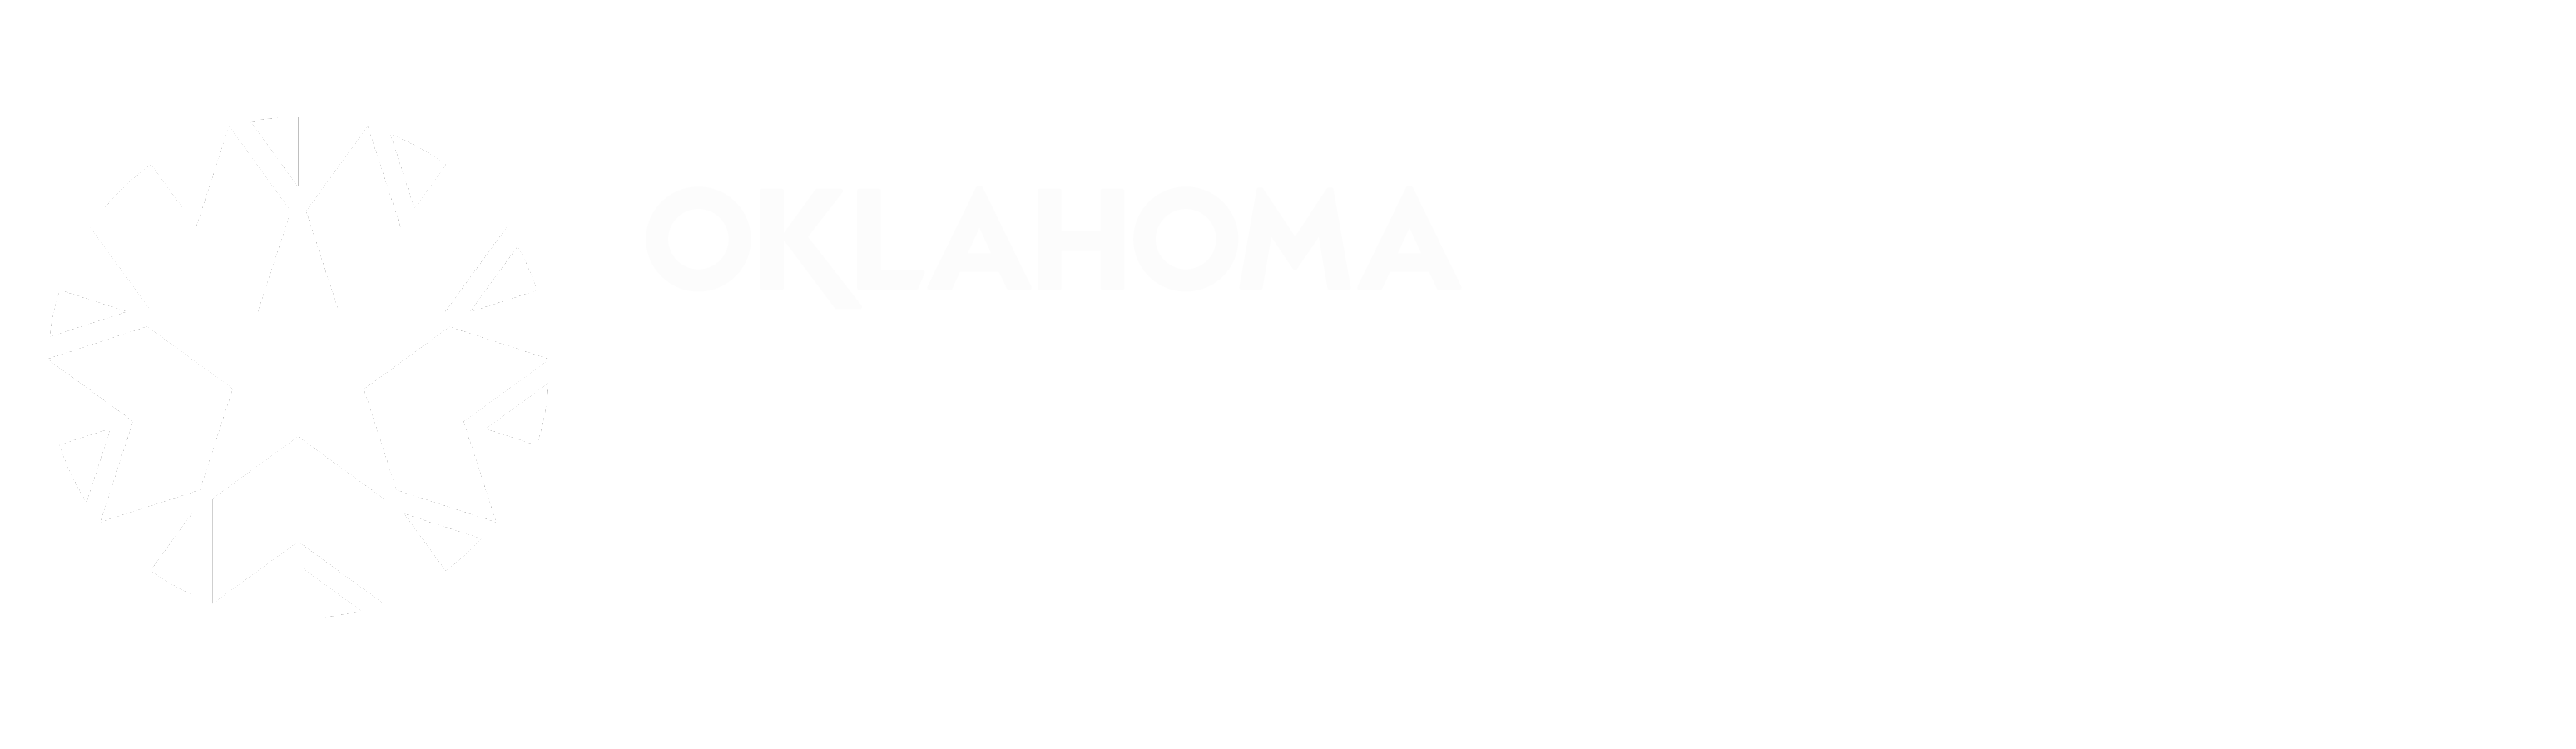 logo for Oklahoma Business Process Operations Center of Excellence